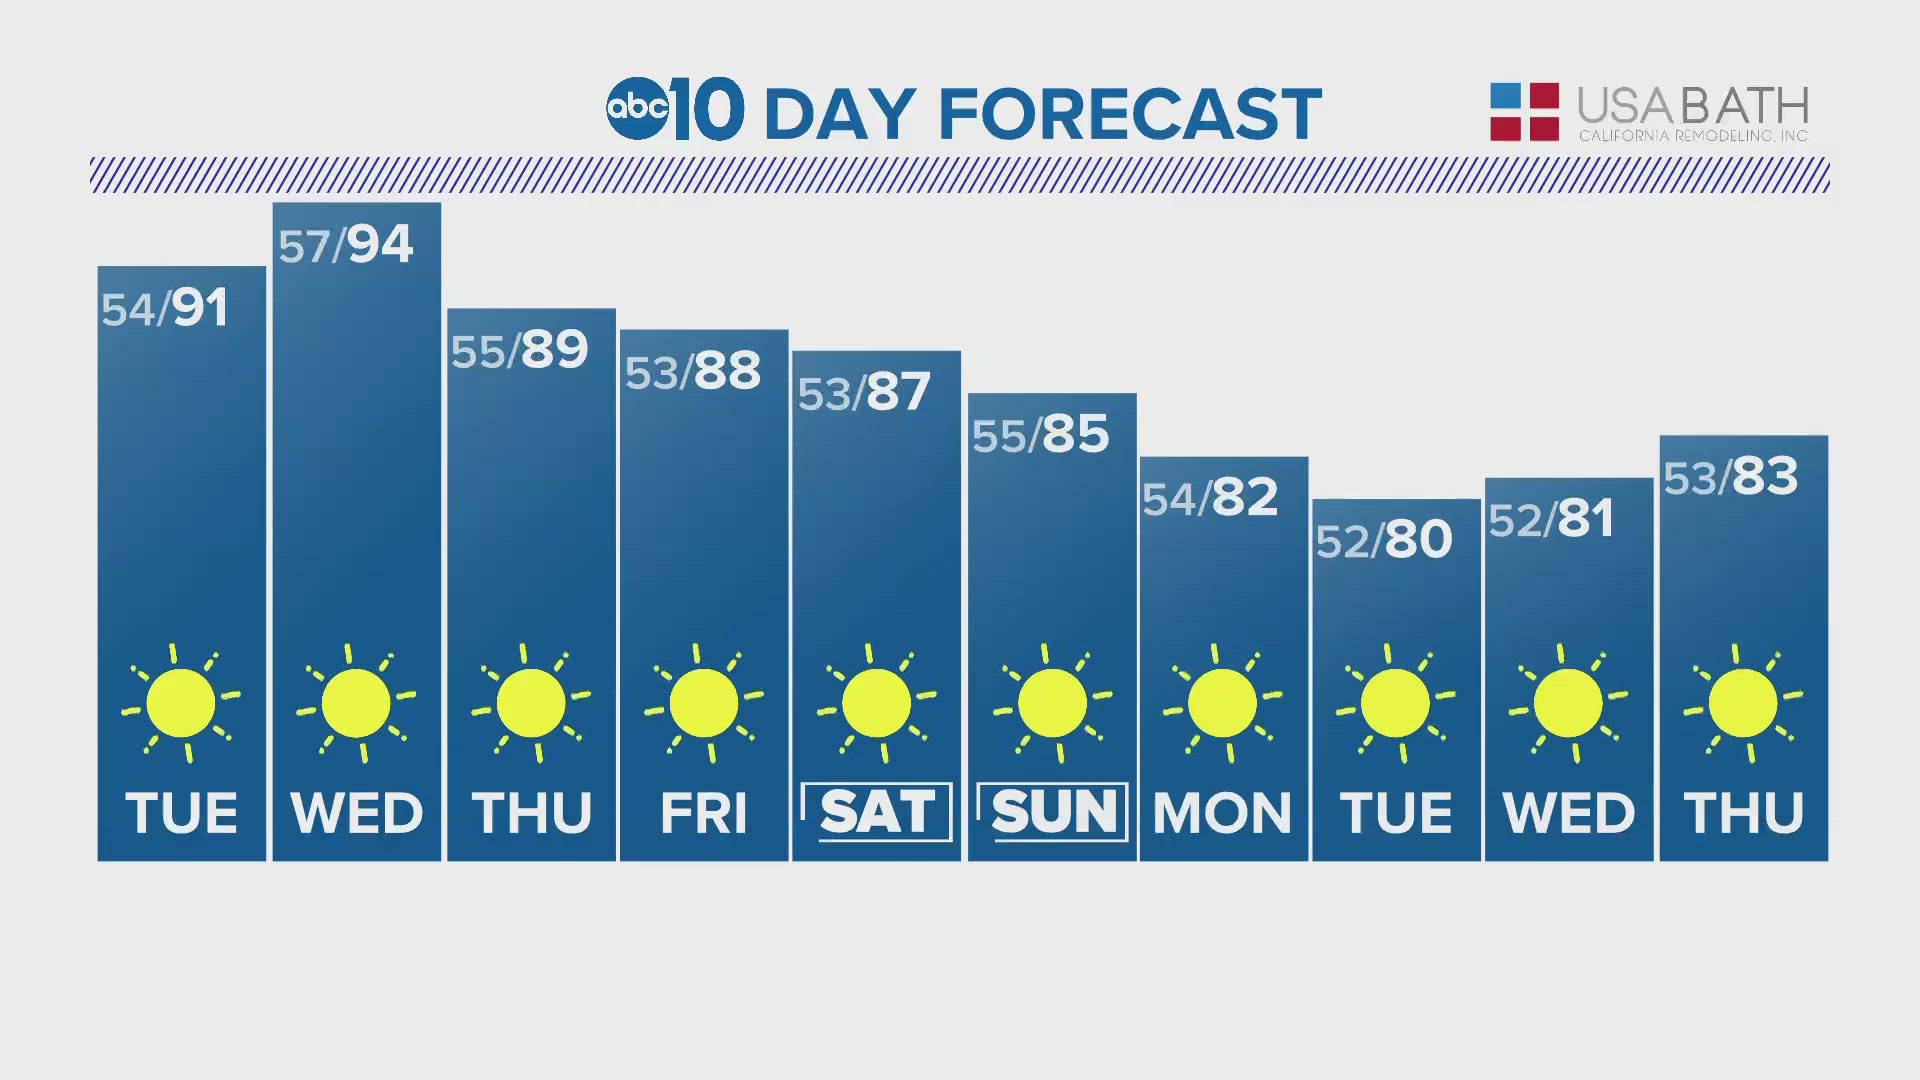 ABC10's Monica Woods gives us a look at our 10-day forecast.